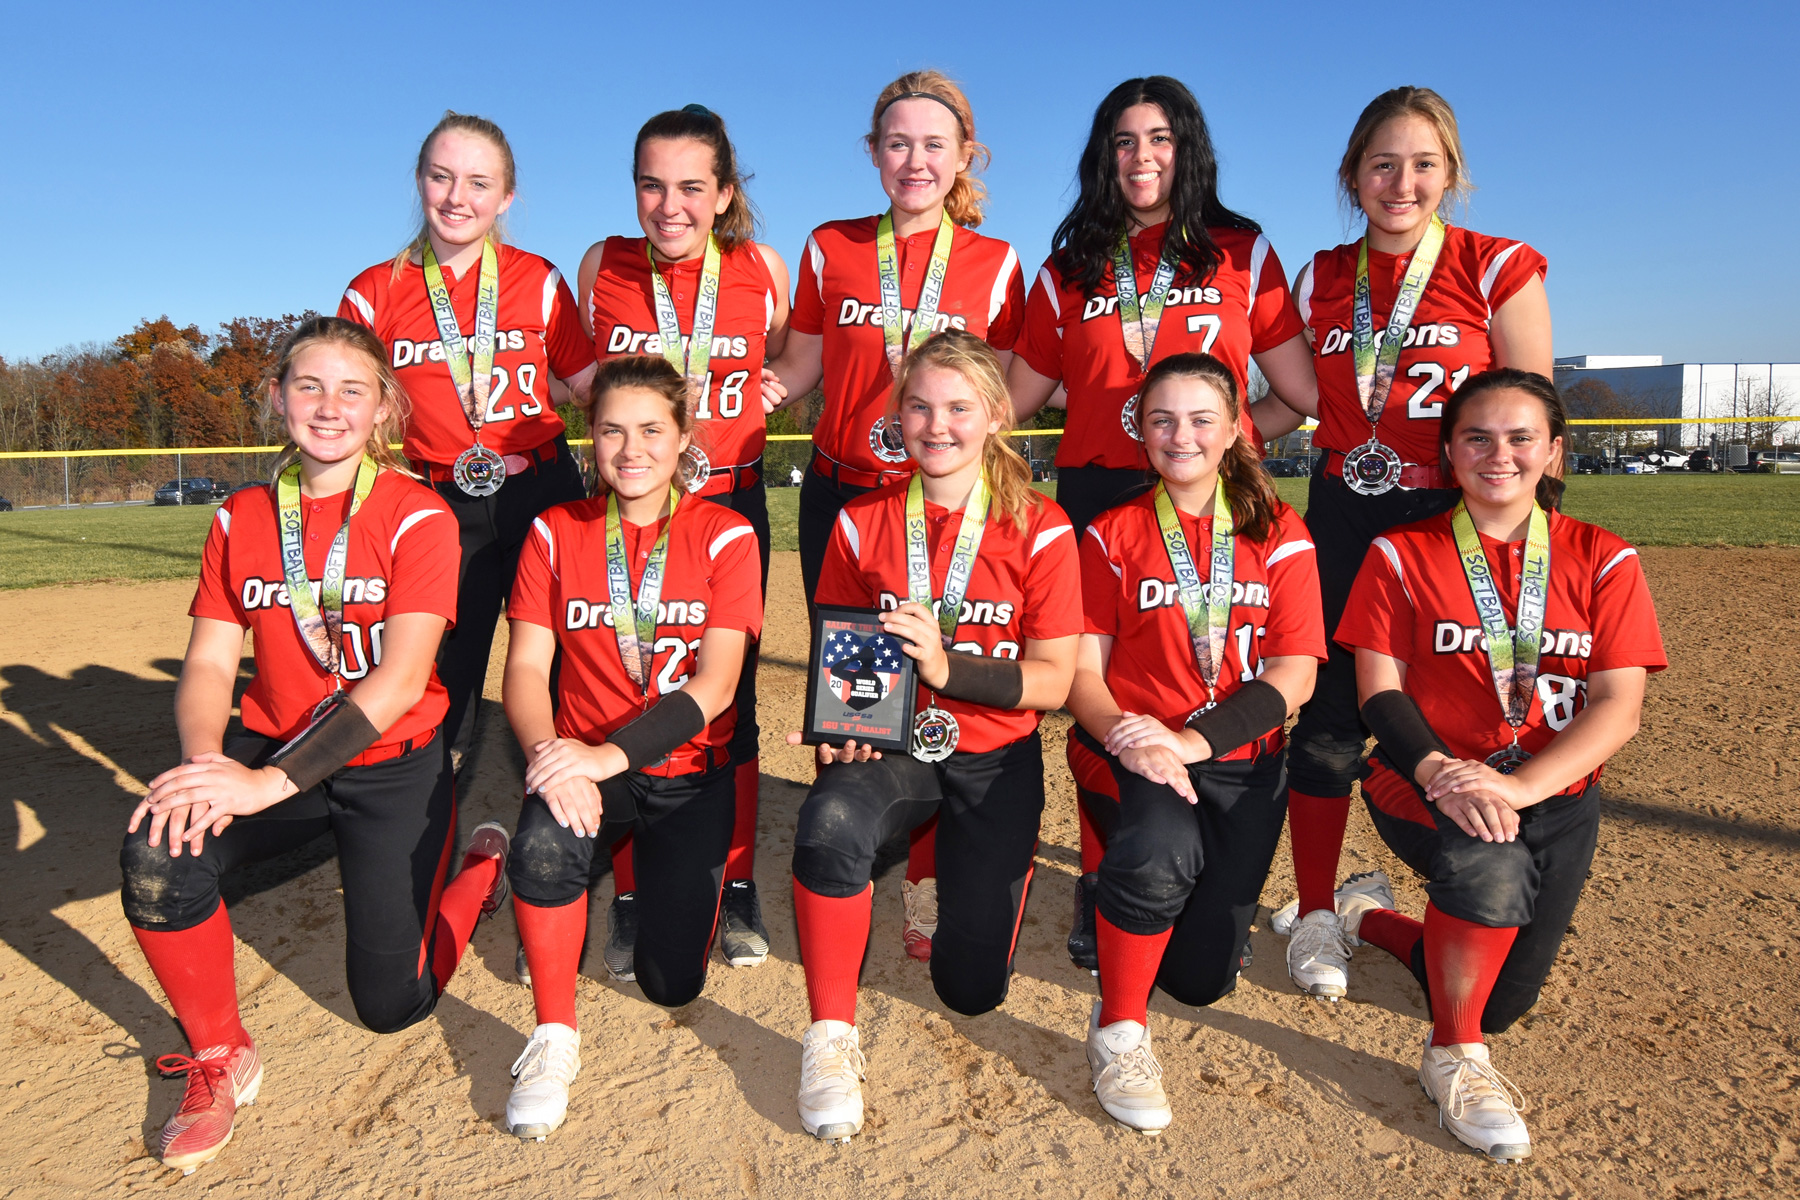 NJ Dragons 16U Finishes in 2nd Place